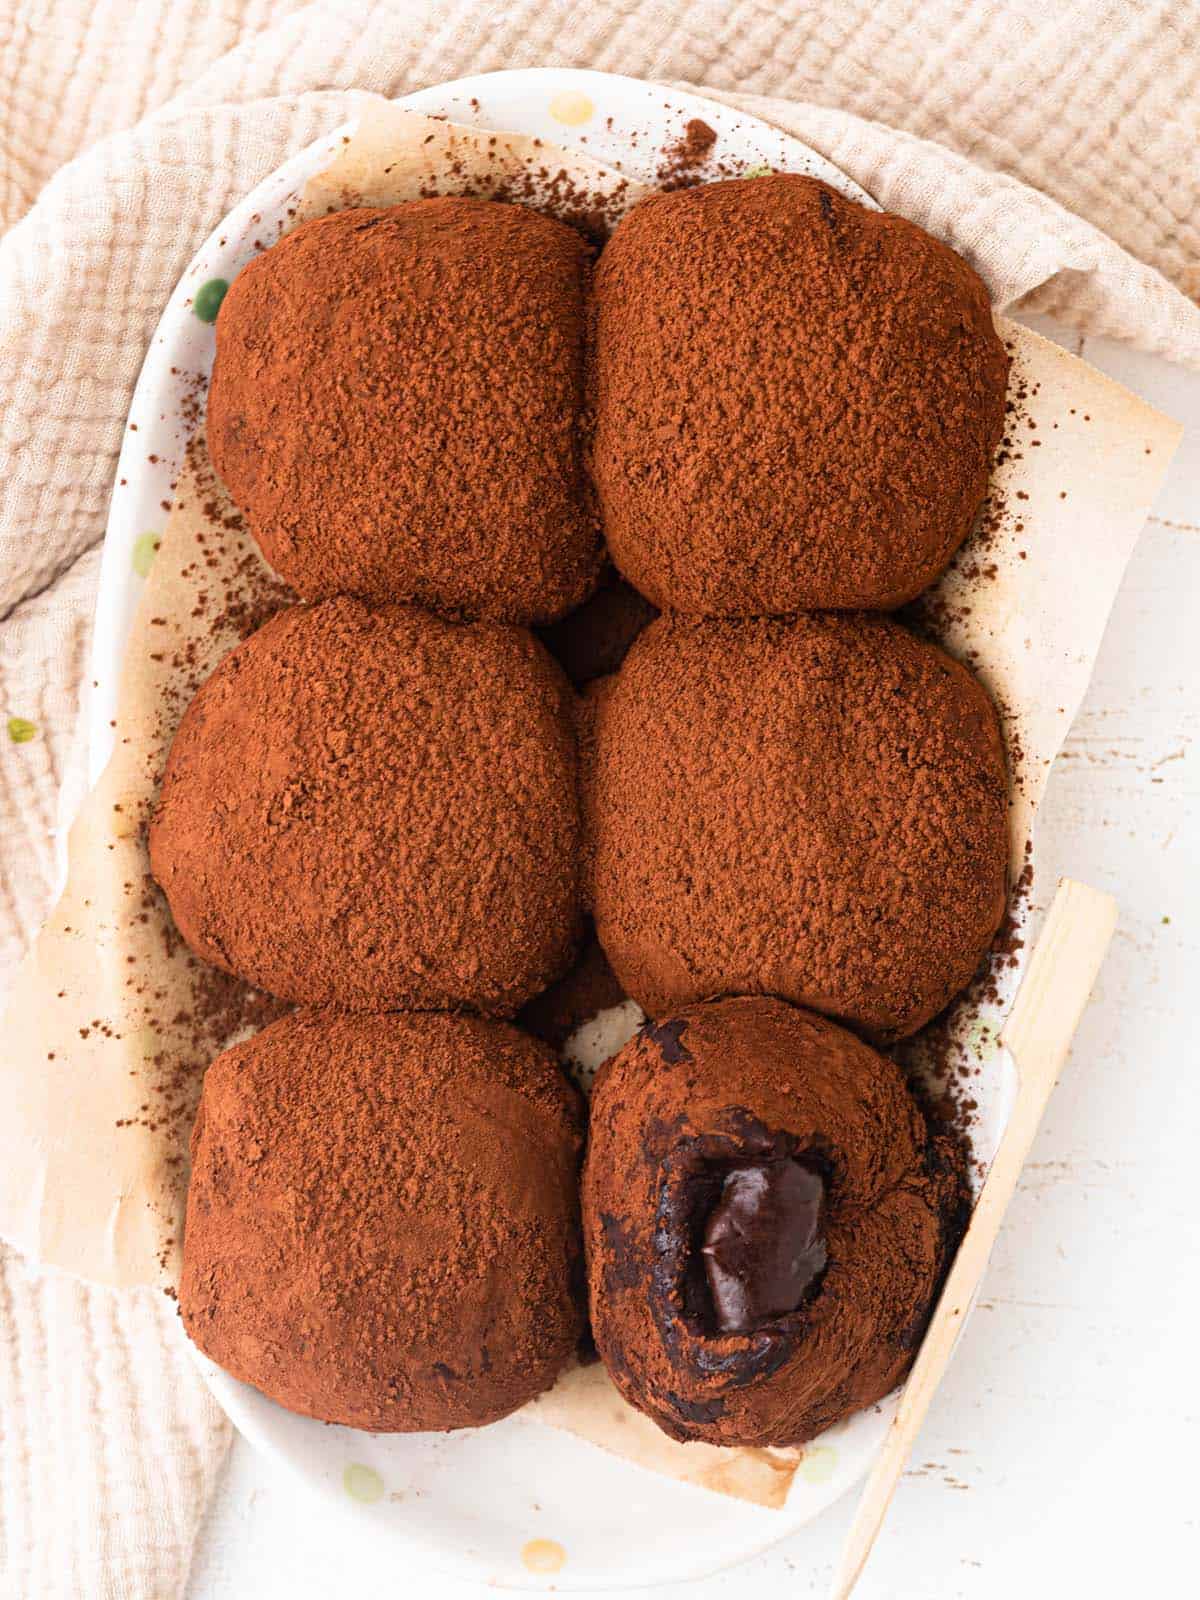 chocolate mochi filled with gooey chocolate ganache dusted with cocoa powder